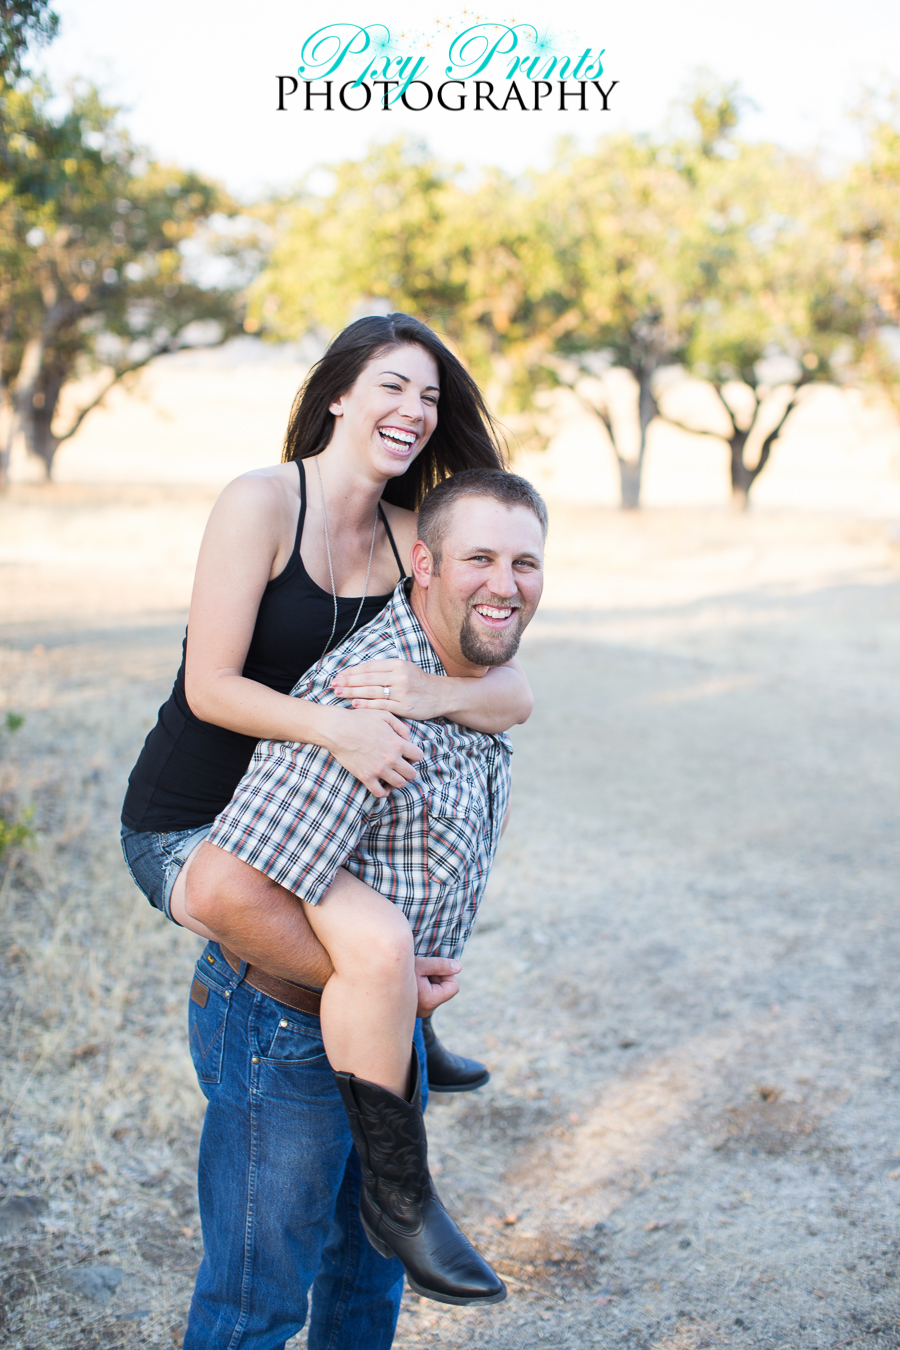 Engagement sessions